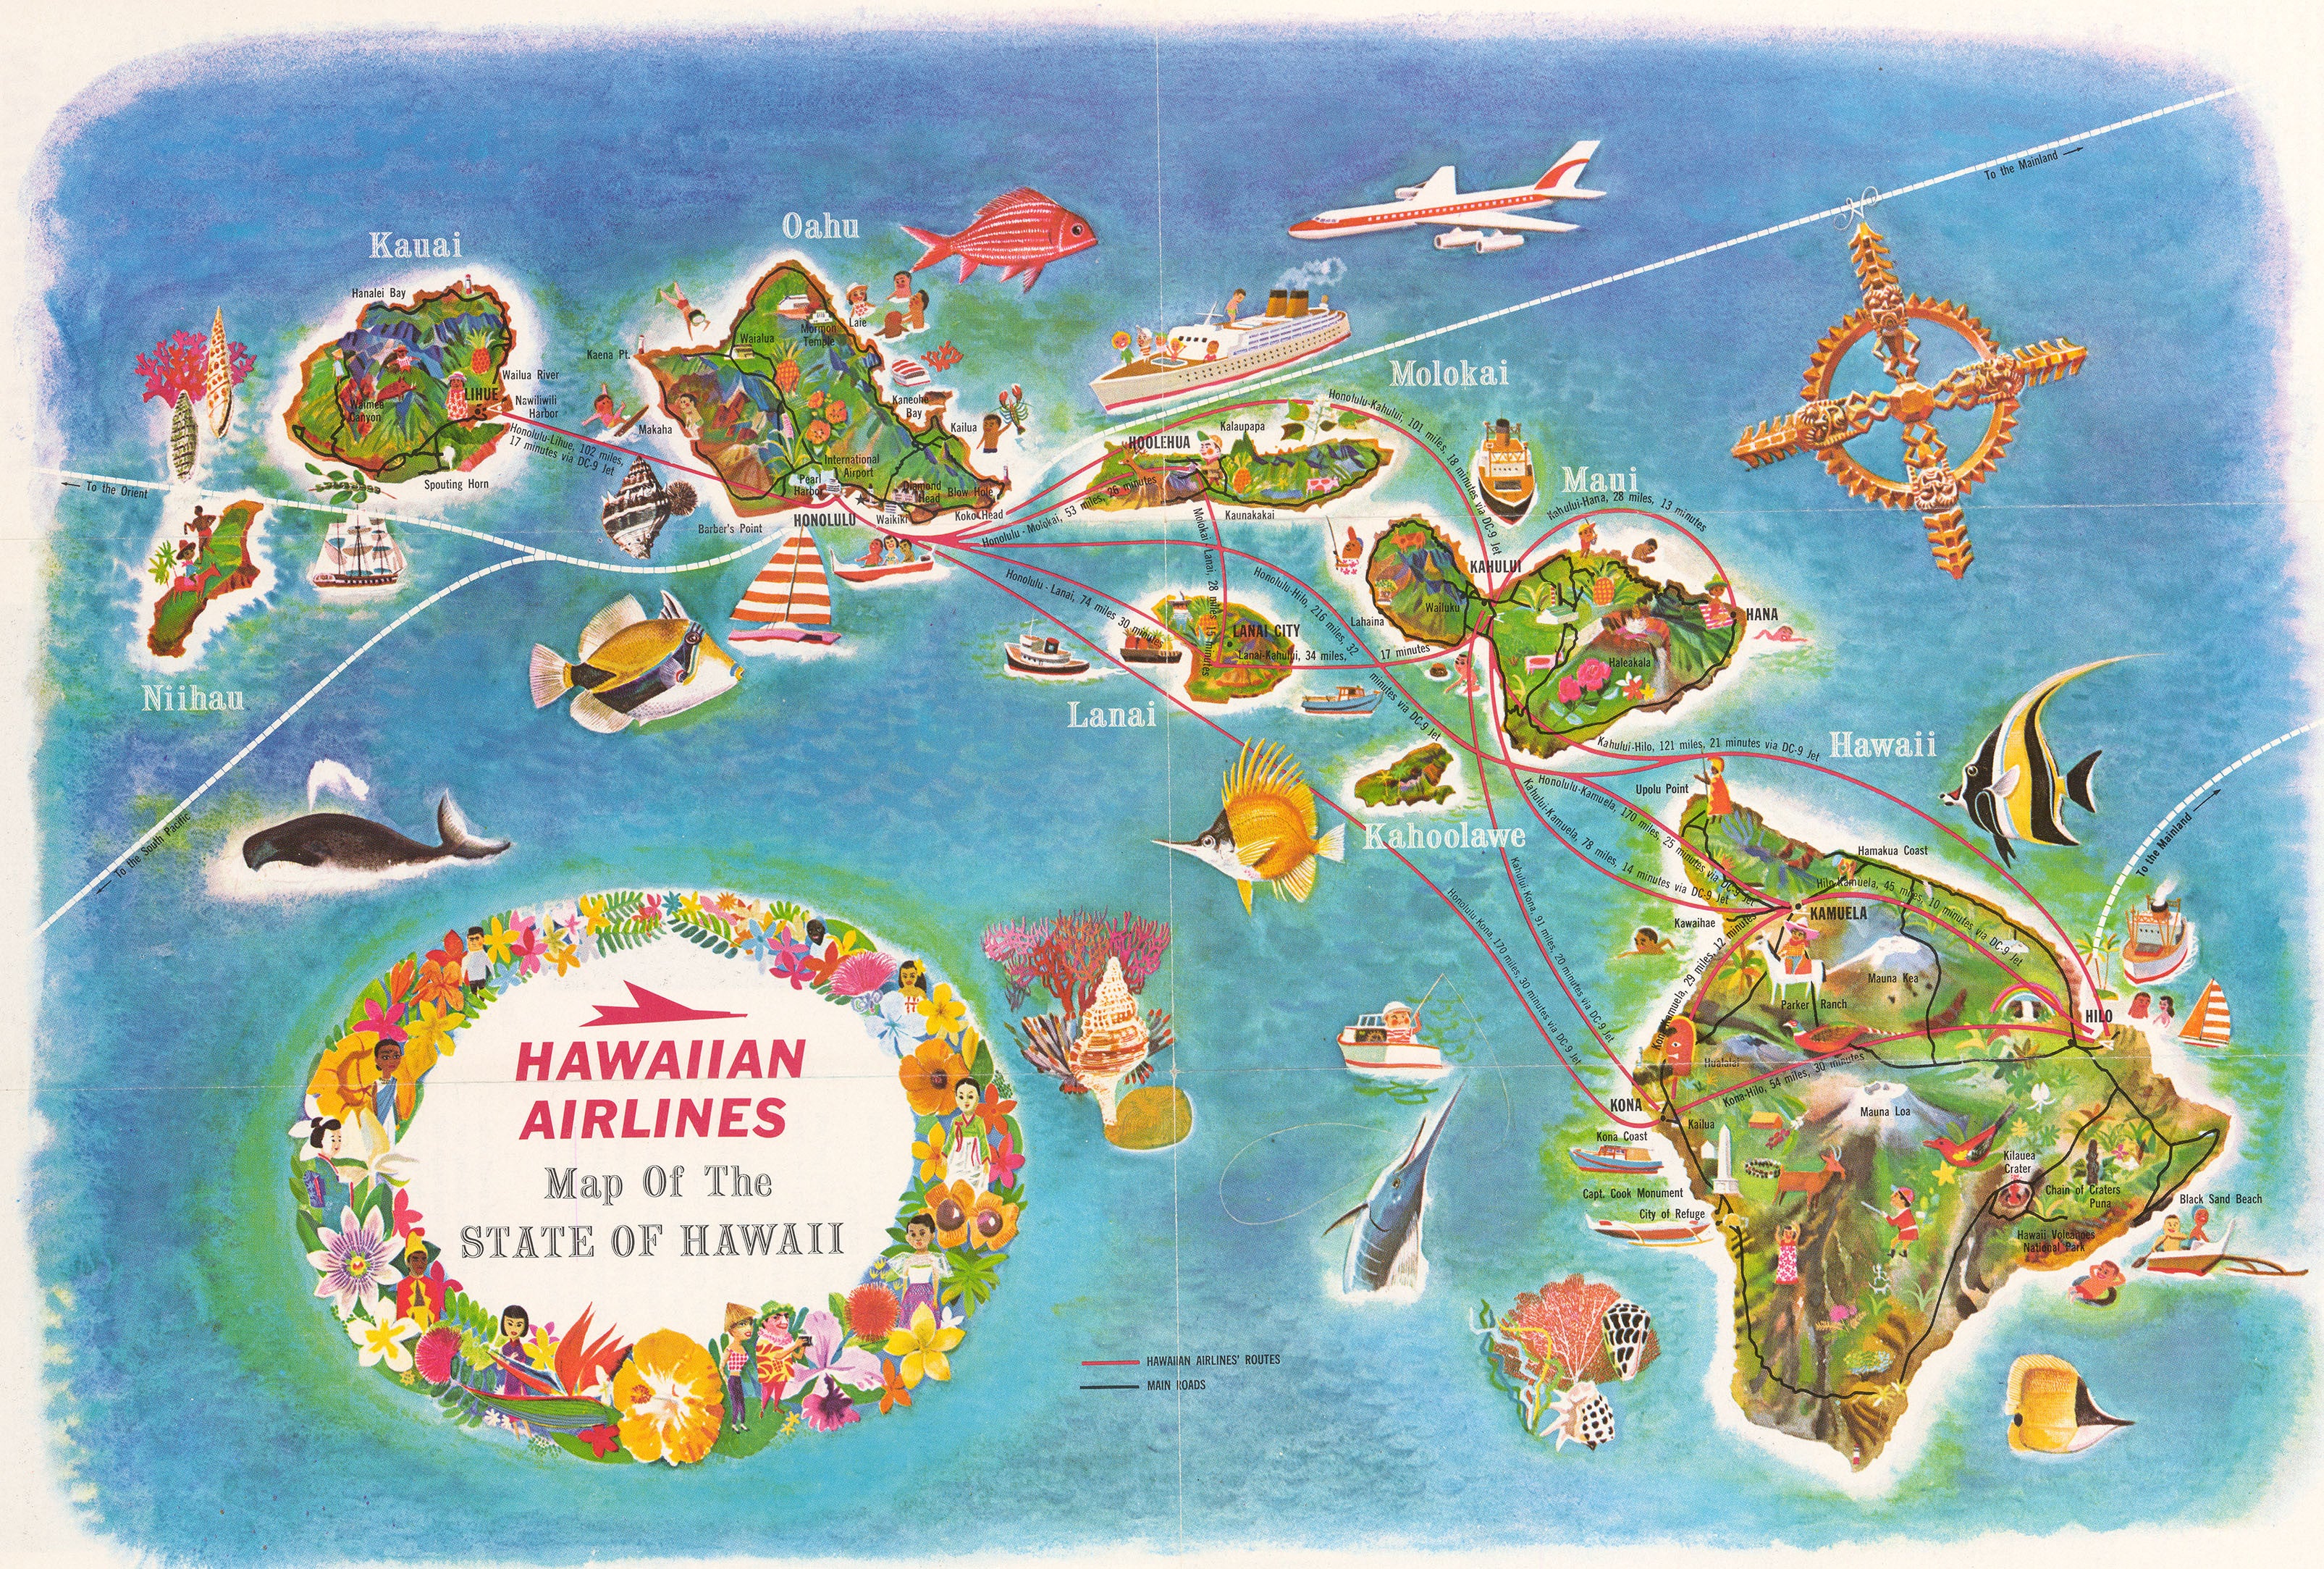 1960 Hawaiian Airlines – Map of the State of Hawaii